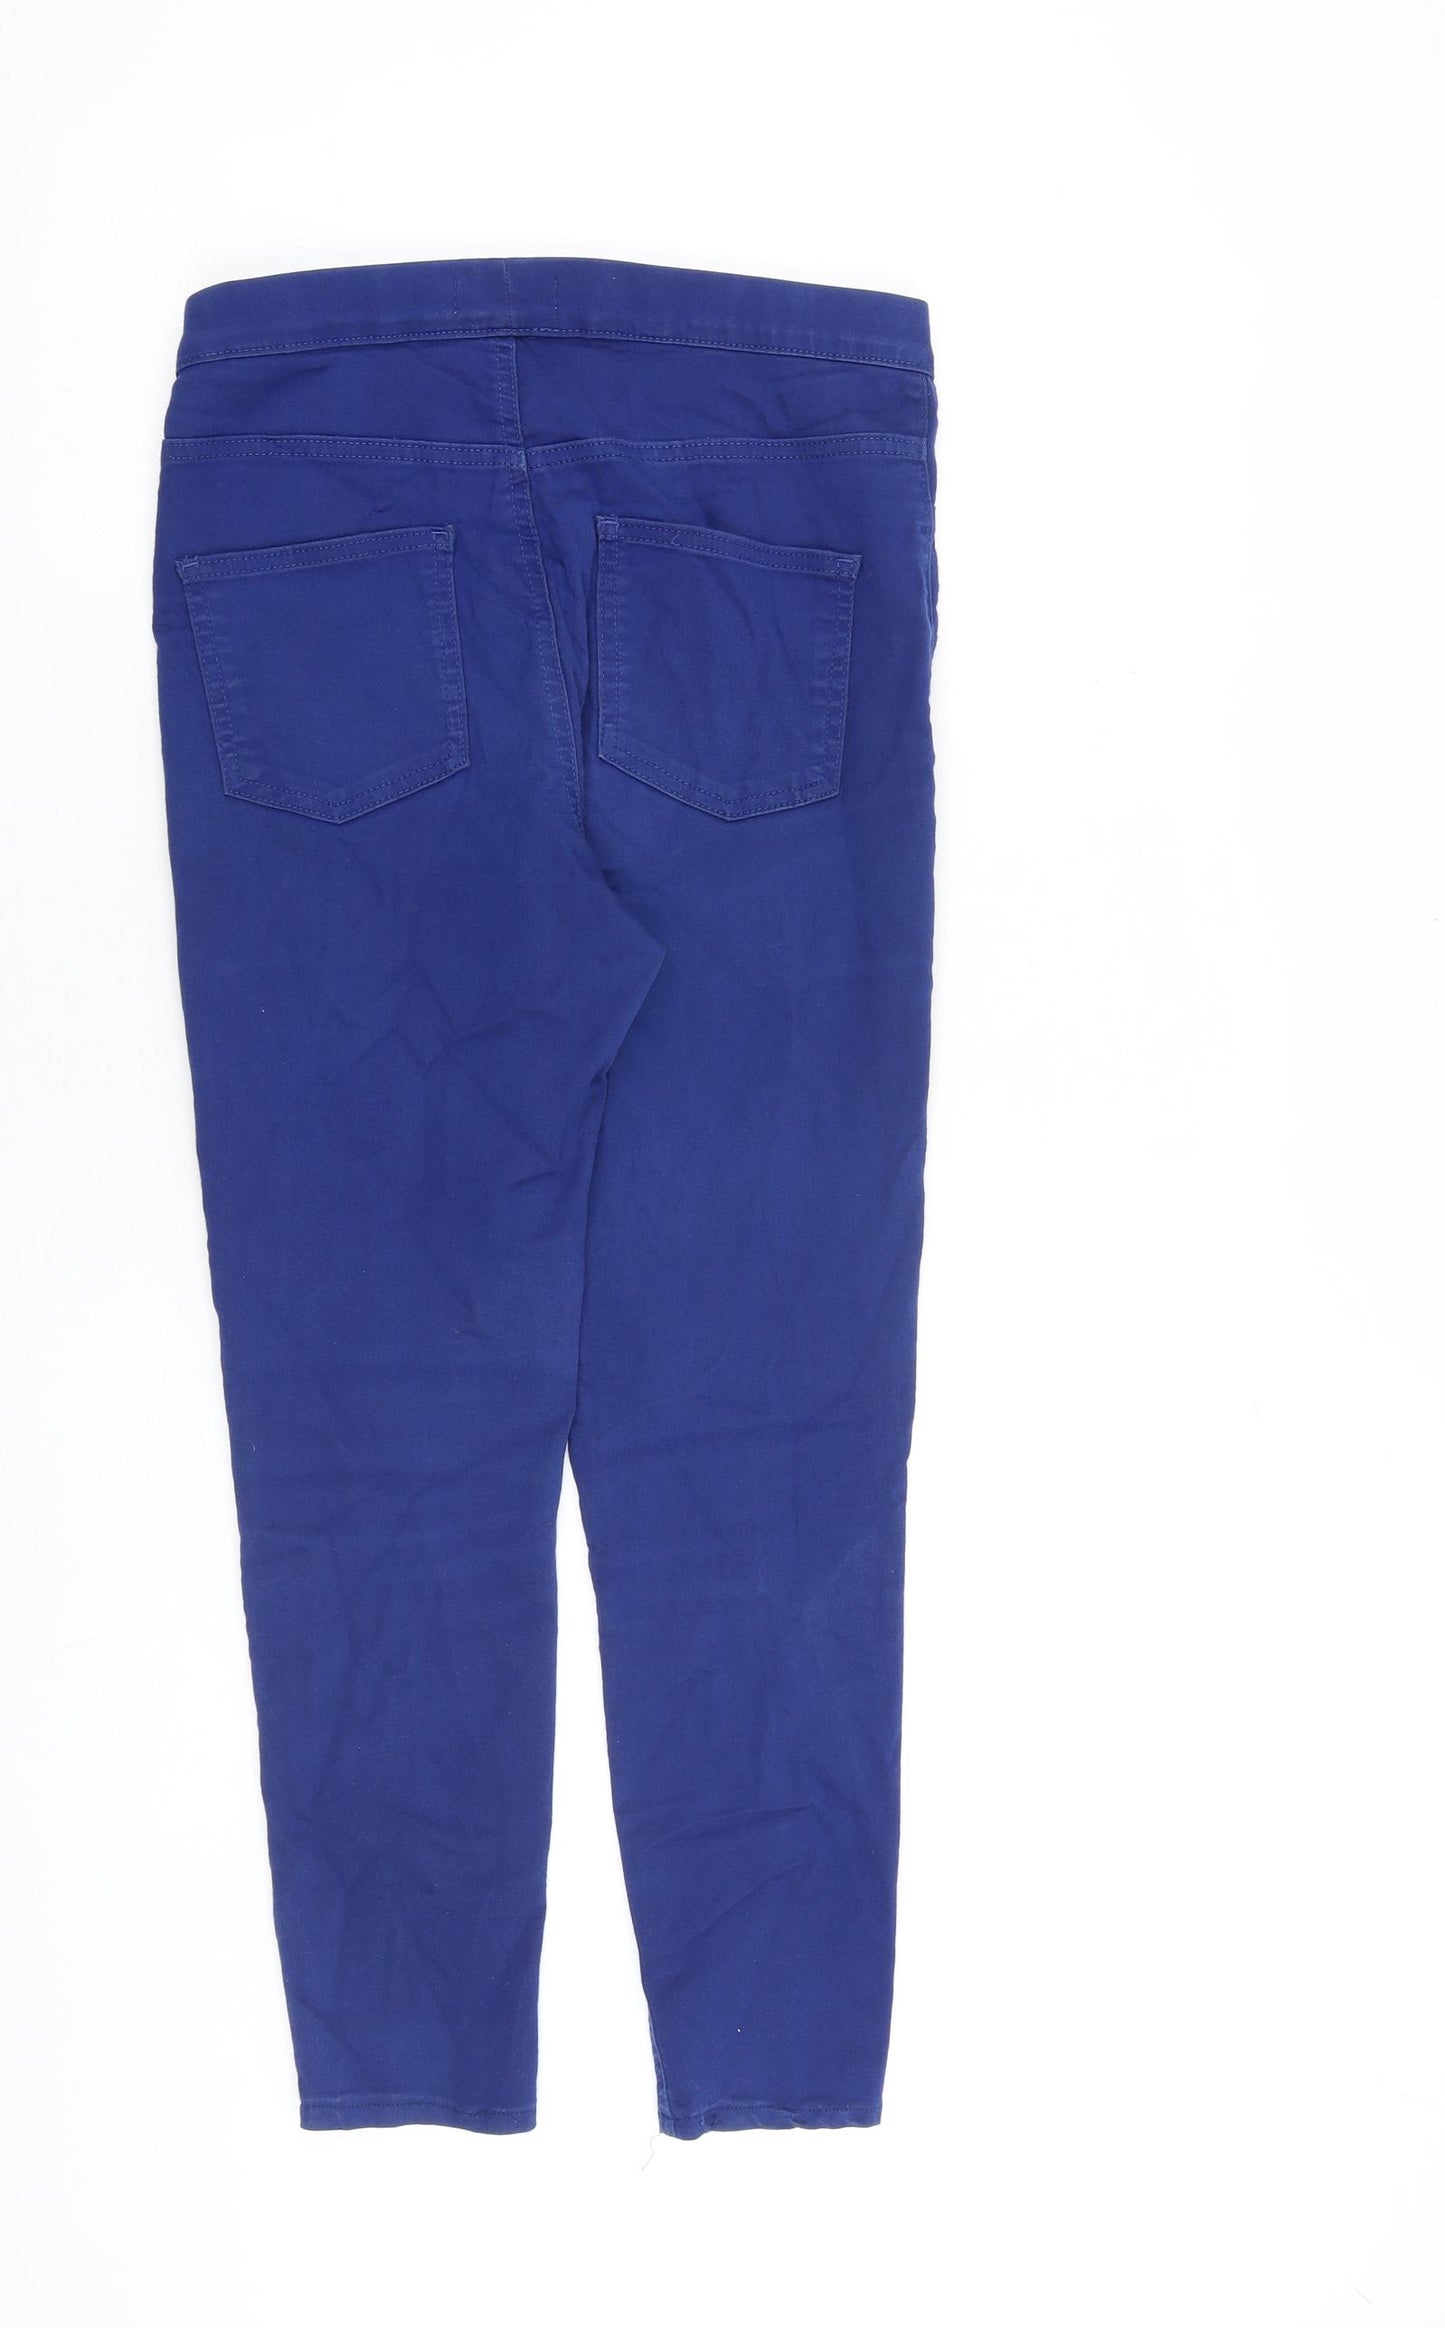 Marks and Spencer Womens Blue Cotton Jegging Jeans Size 10 L25 in Regular